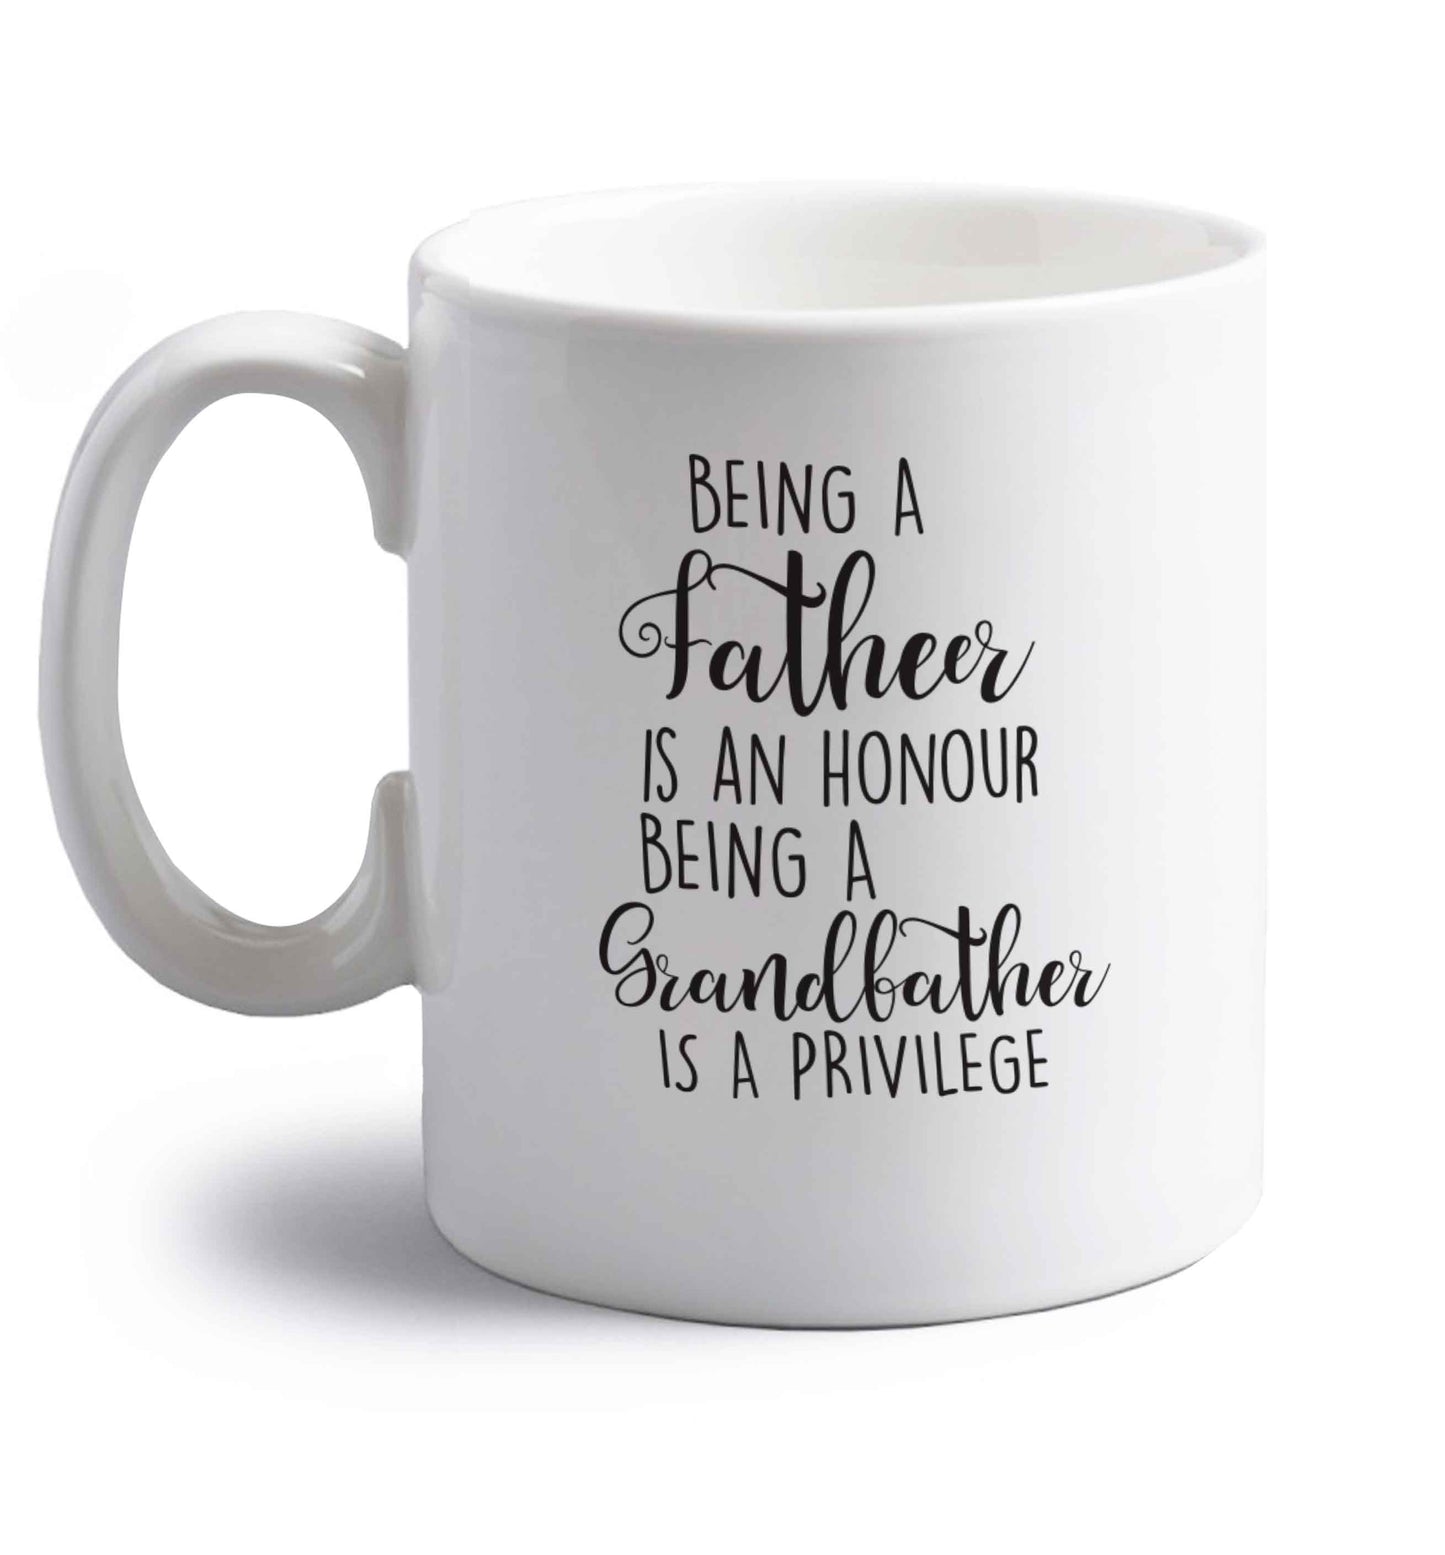 Being a father is an honour being a grandfather is a privilege right handed white ceramic mug 